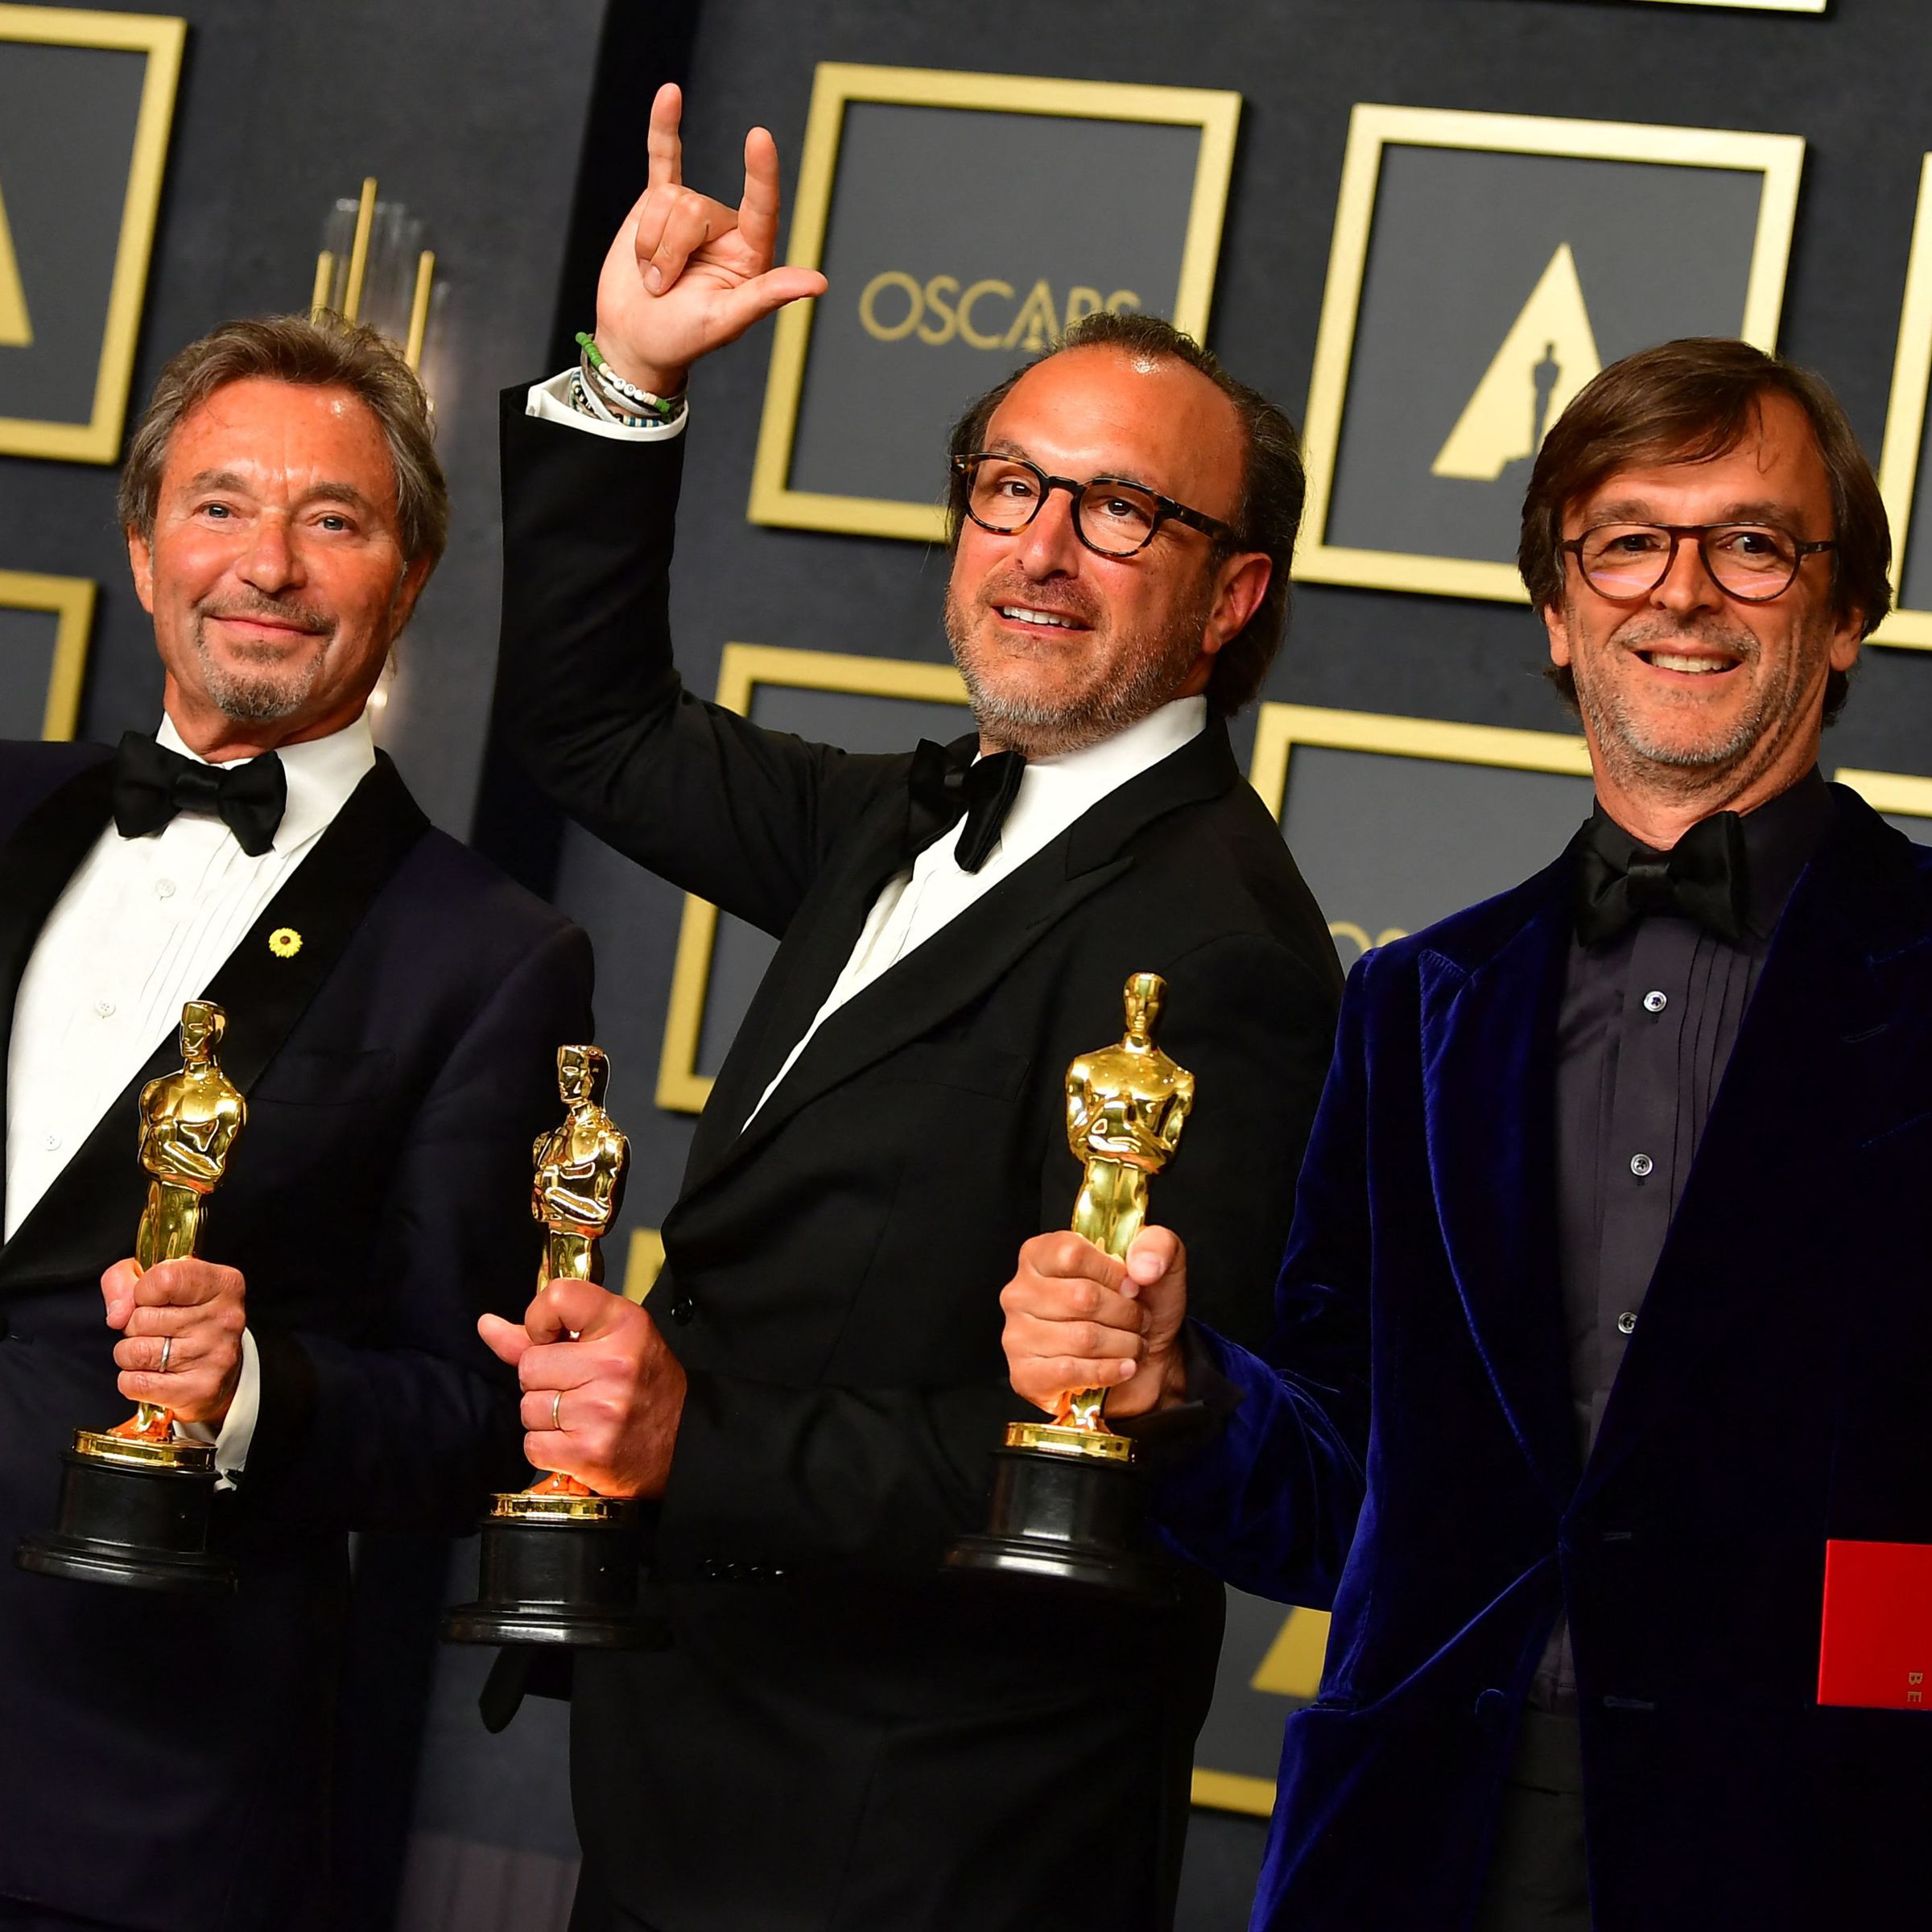 Coda producers Philippe Rousselet (L), Fabrice Gianfermi (R) and Patrick Wachsberger (C) posing with Code’s Best Picture award.